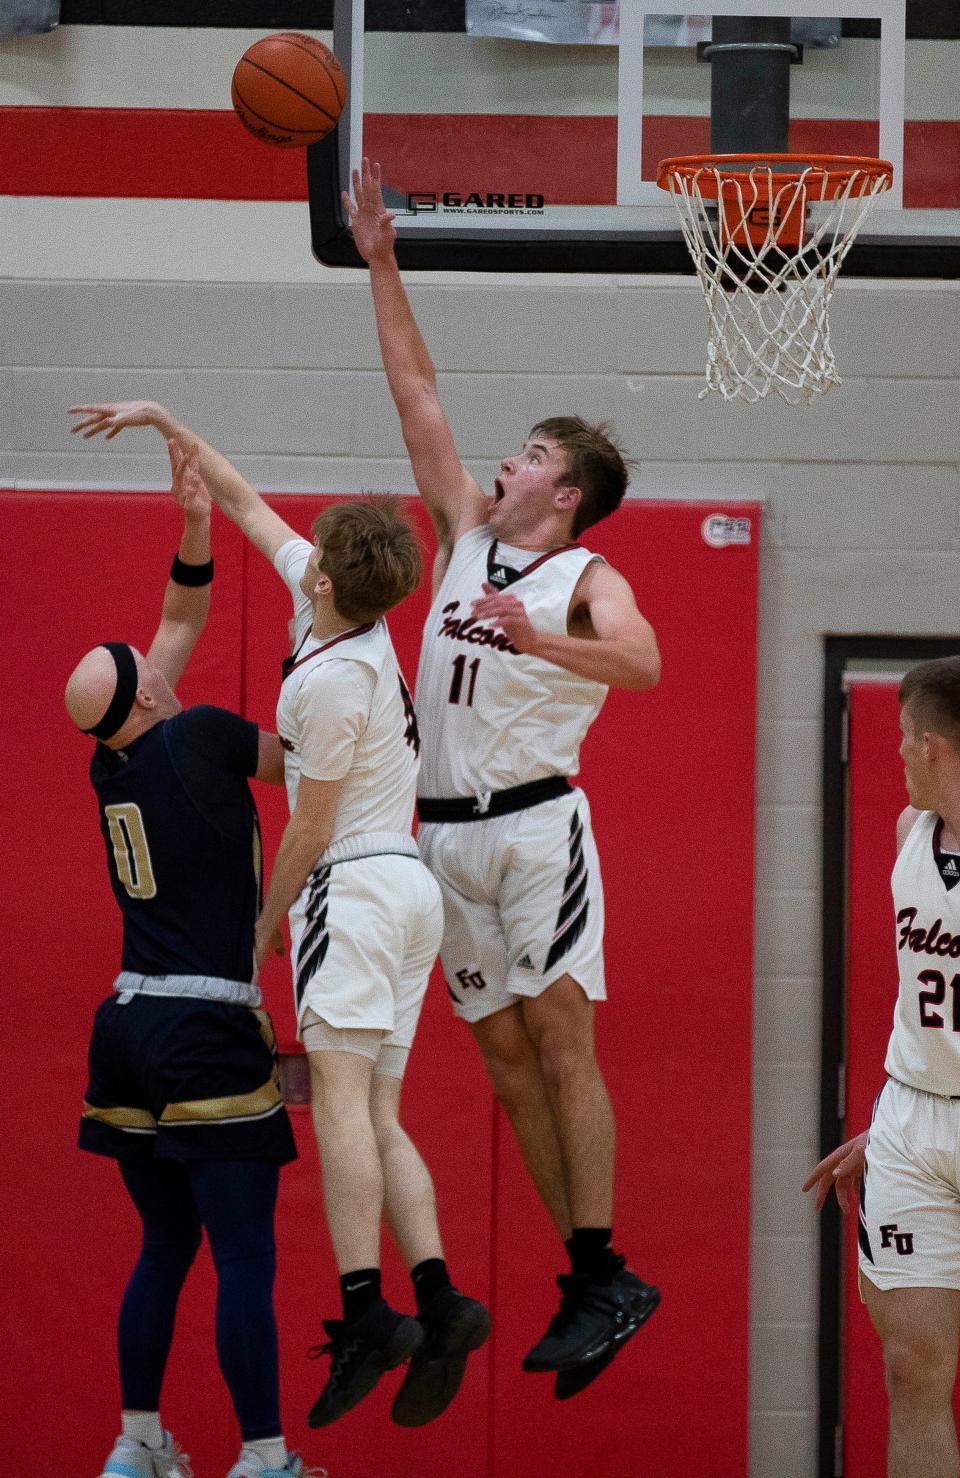 The Fairfield Union boys' basketball team, with a 17-3 overall record, drew the highest seed of area teams as they earned the No. 2 seed in the Southeast District in Division II.